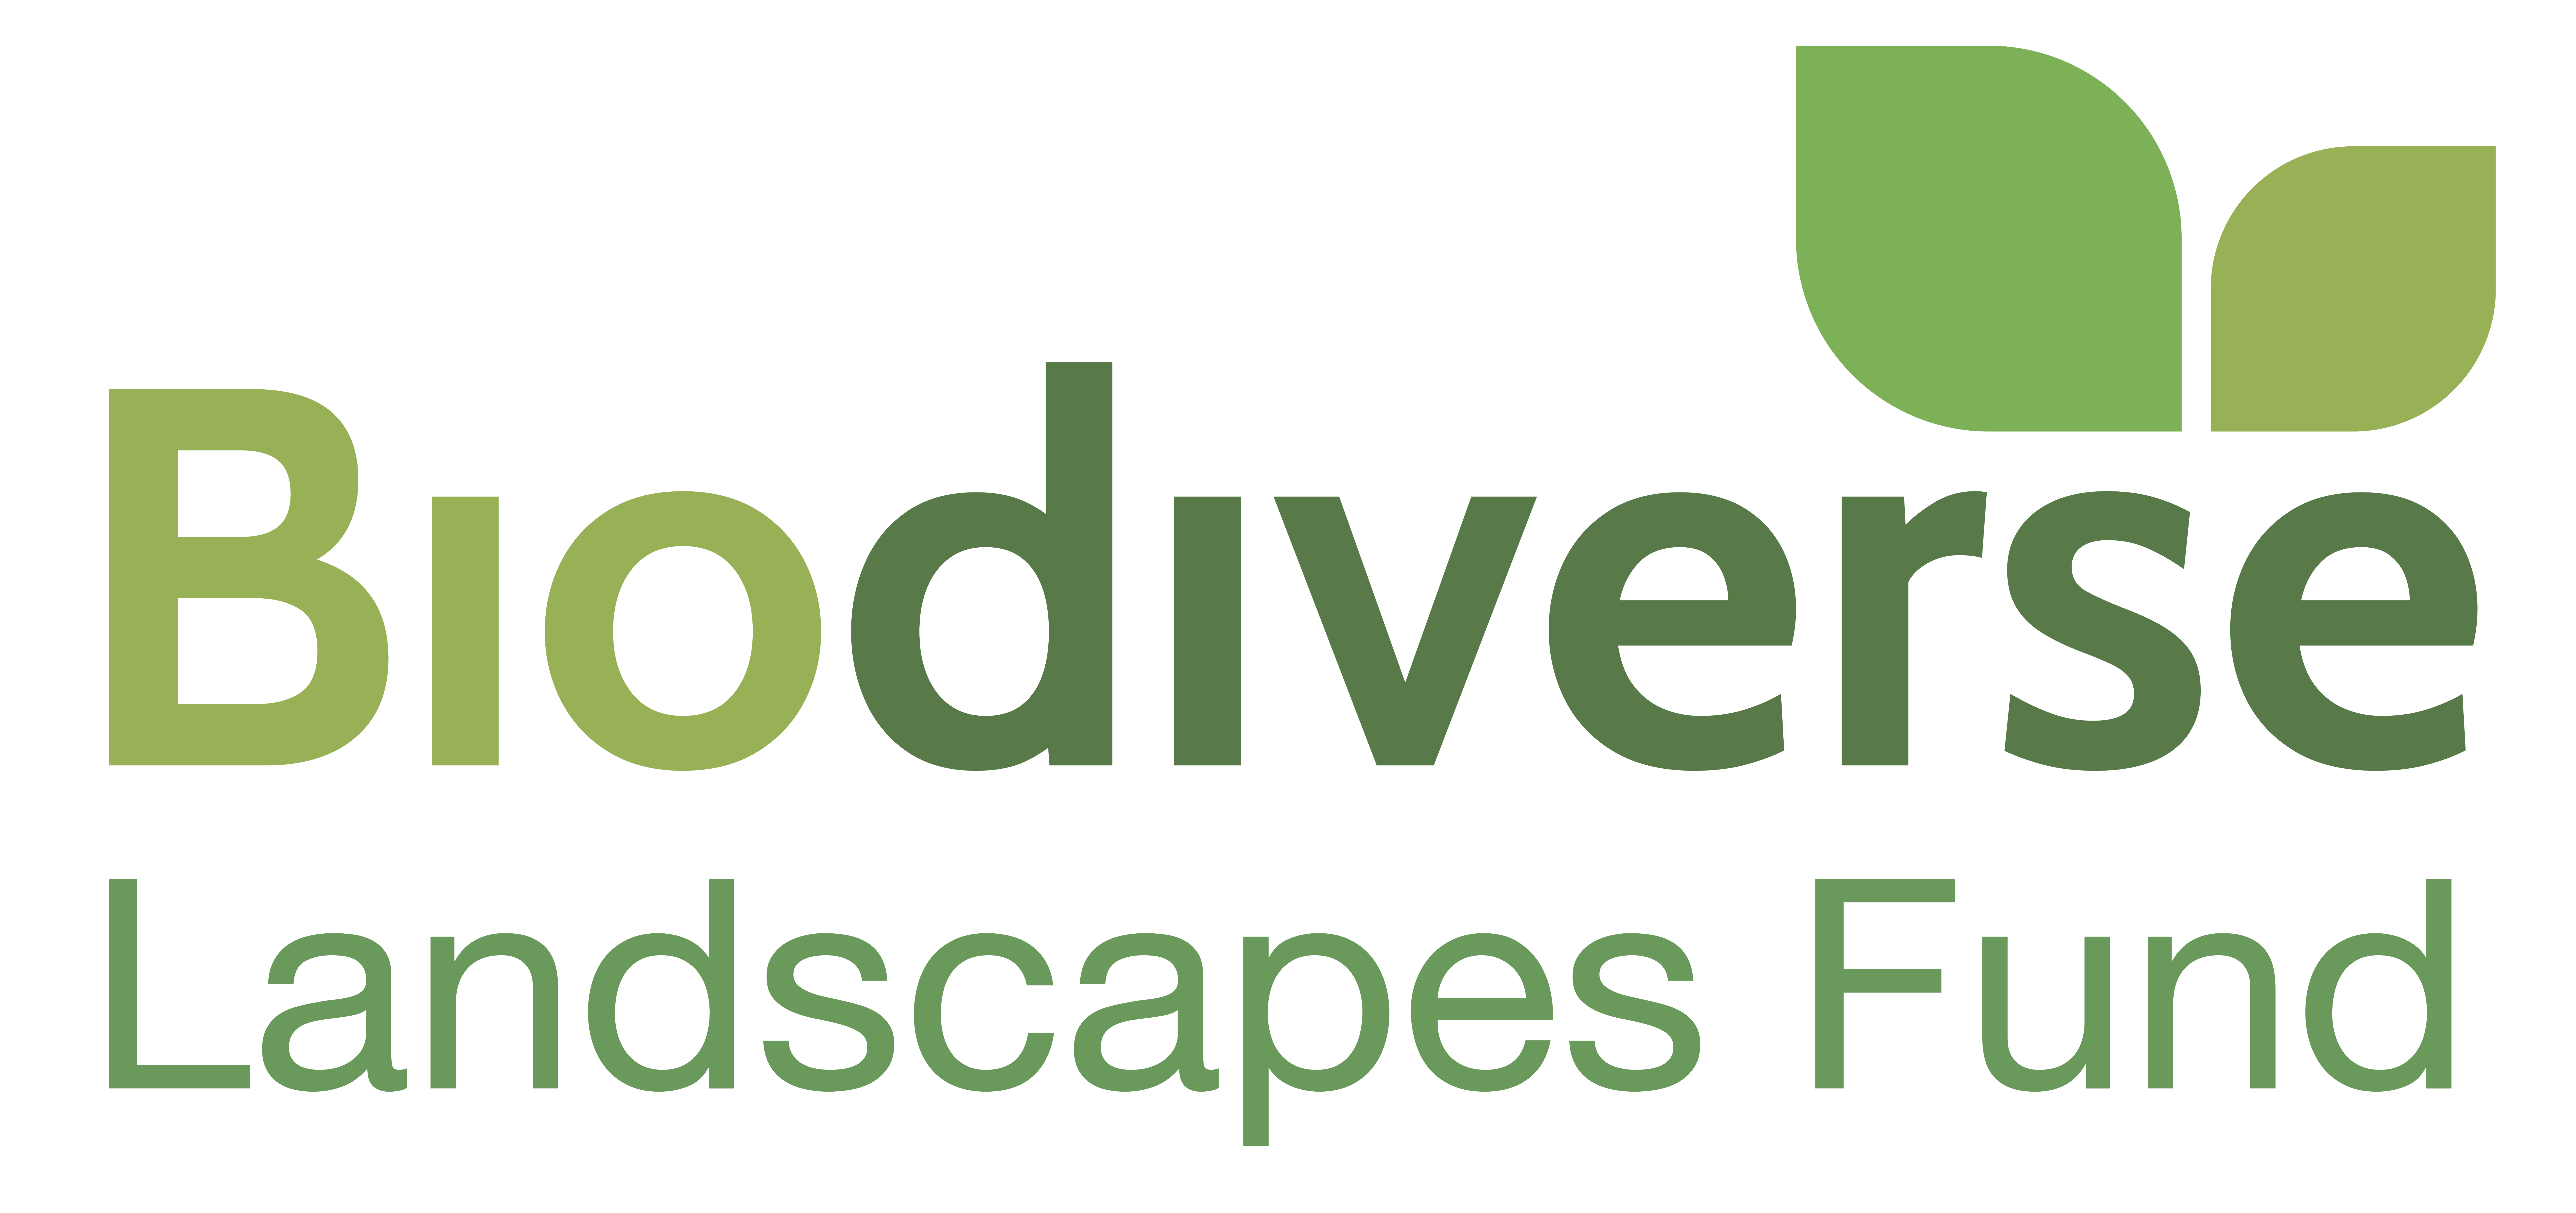 Biodiverse landscapes fund logo shows the company name with two small leaves